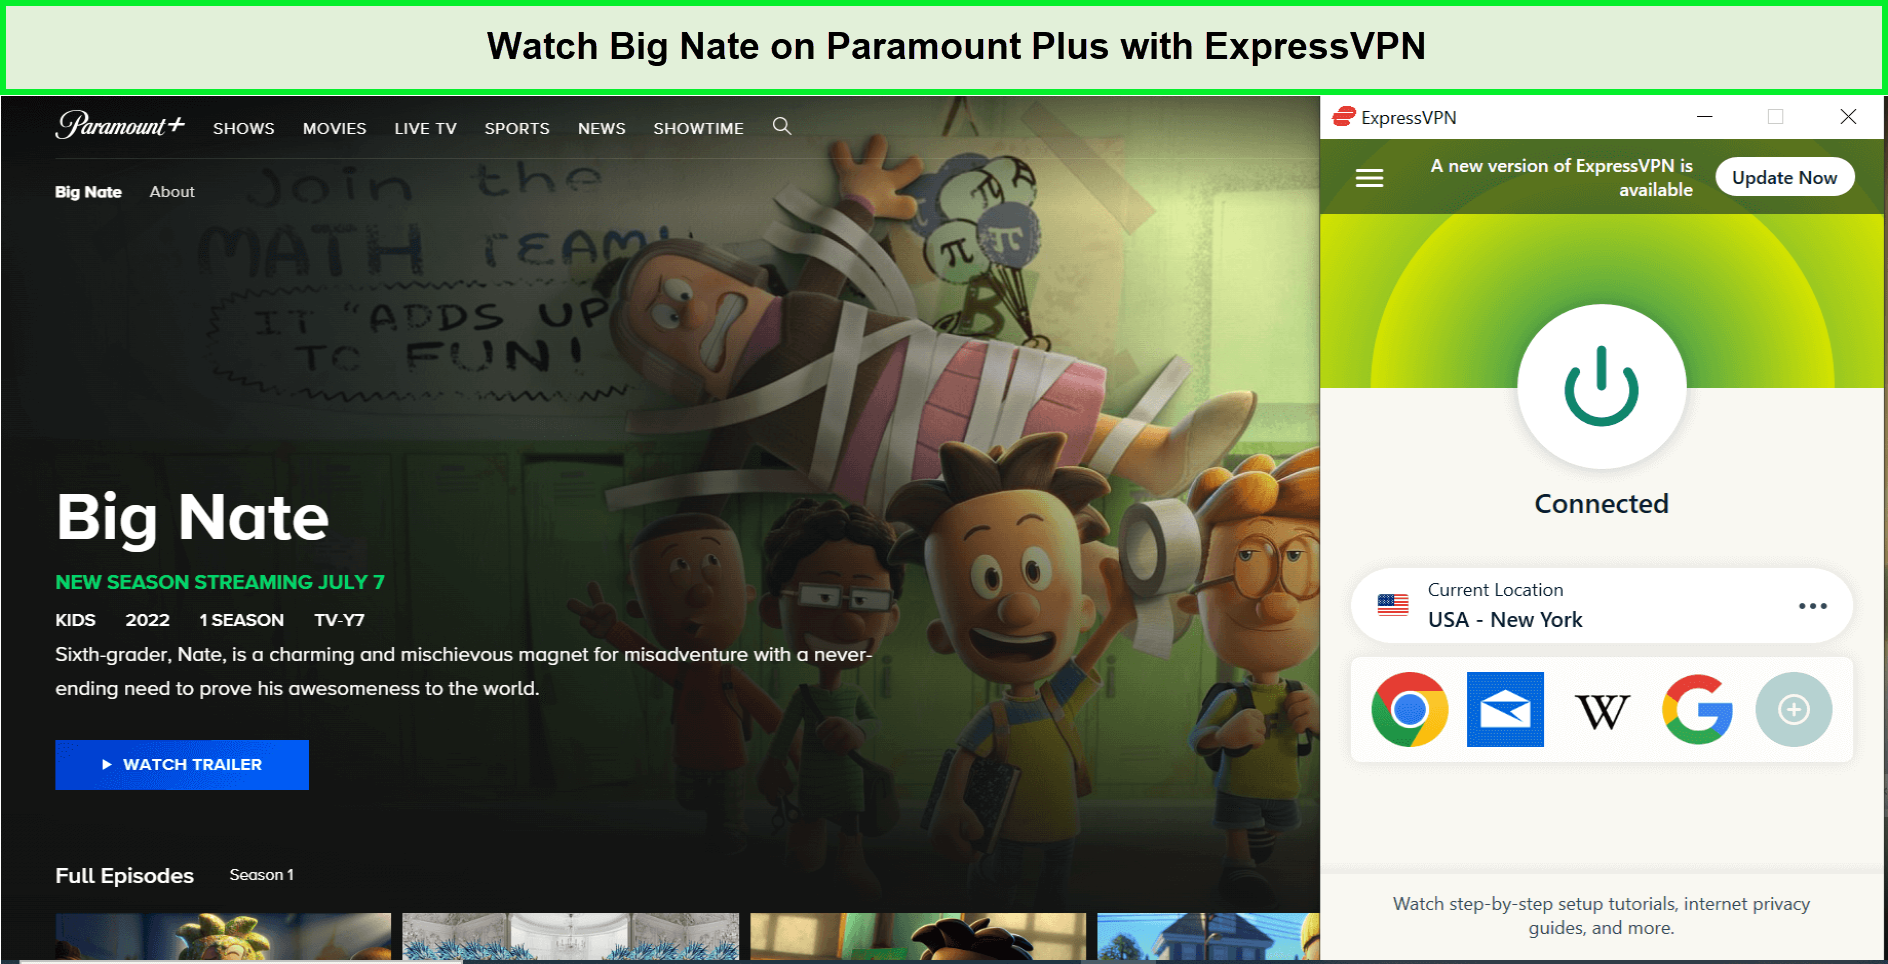 Watch-Big-Nate-Season-2-in-India-on-Paramount-Plus-with-ExpressVPN